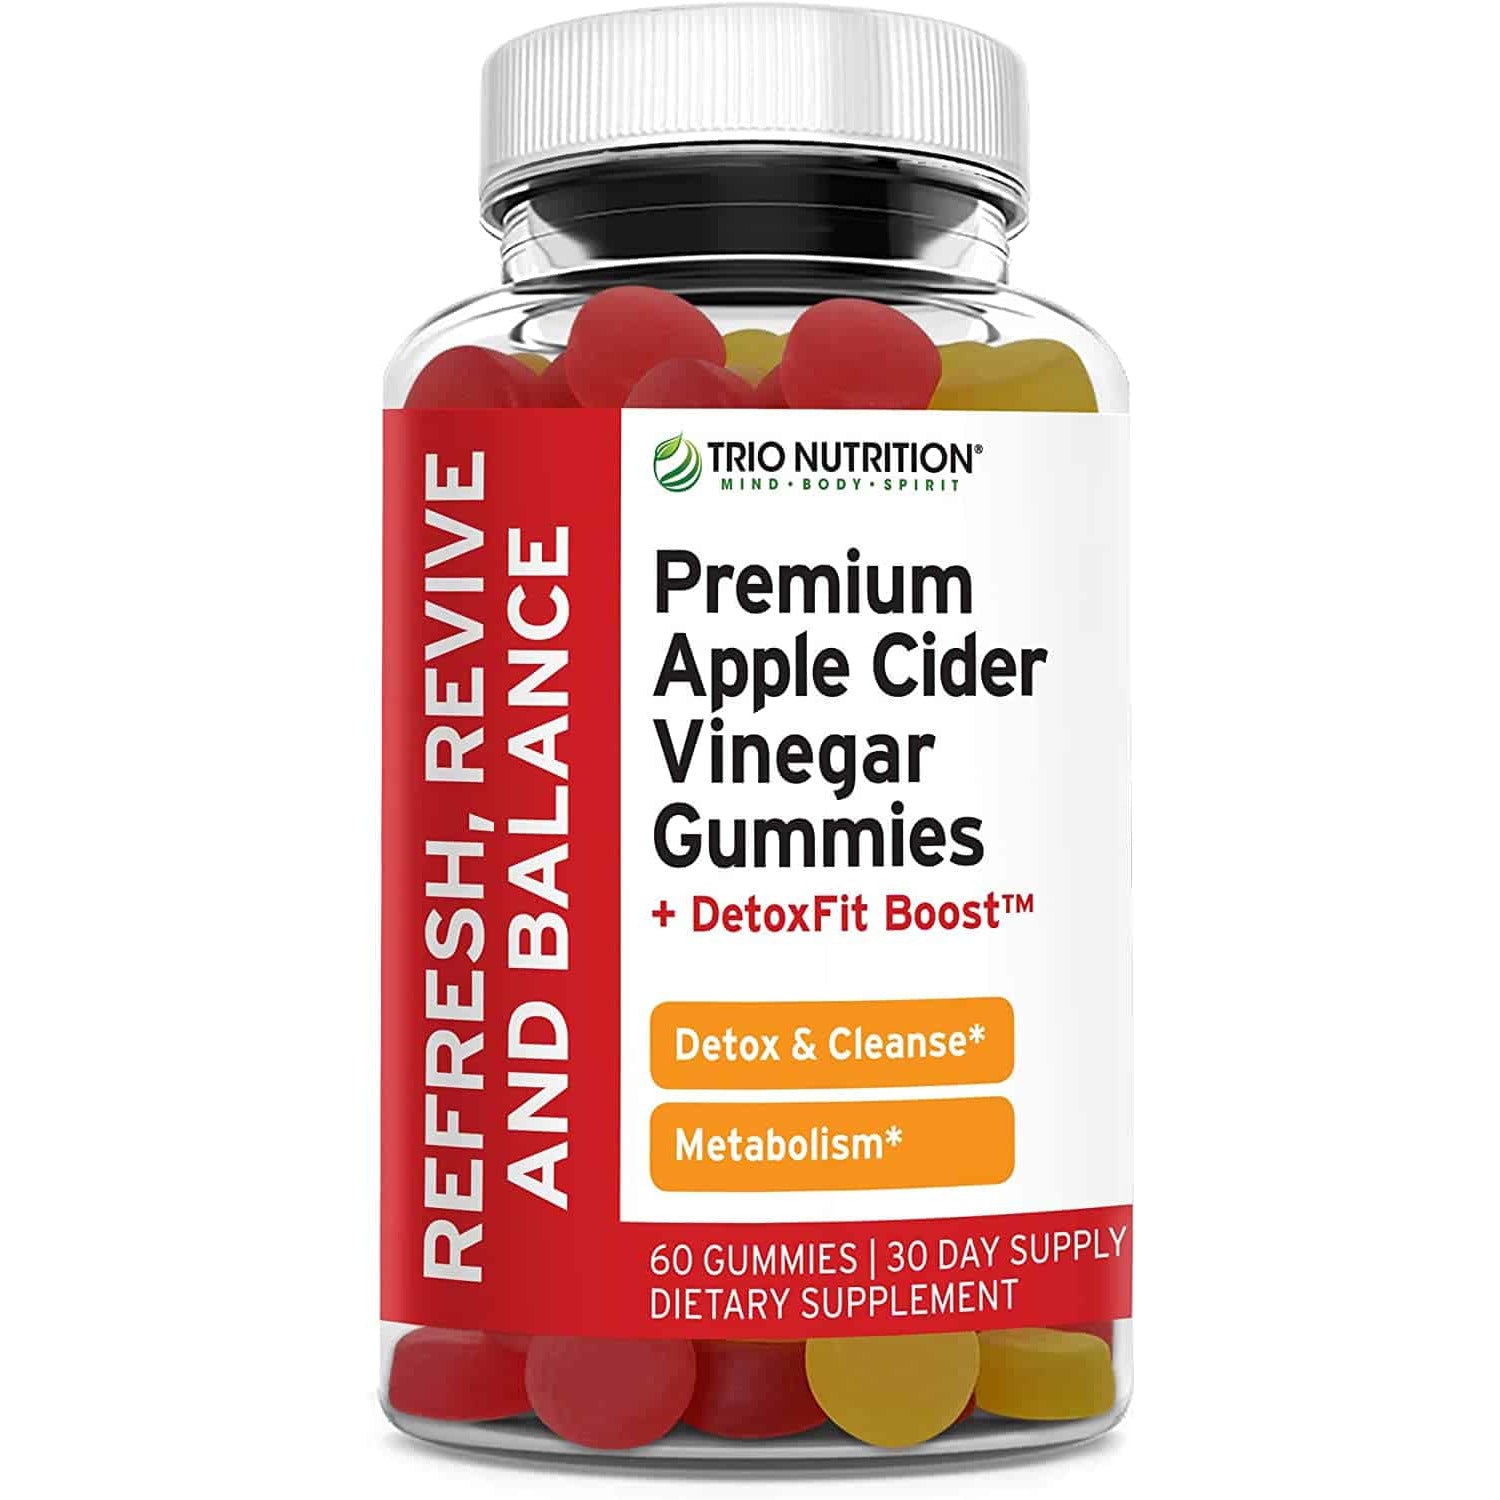 Premium Apple Cider Vinegar Gummy Vitamins | Fresh ACV with The Mother | Delicious Easy to Swallow Alternative to ACV Capsules, Pills, Tablets | Maximum Strength Boosted Raw Detox Cleanse *